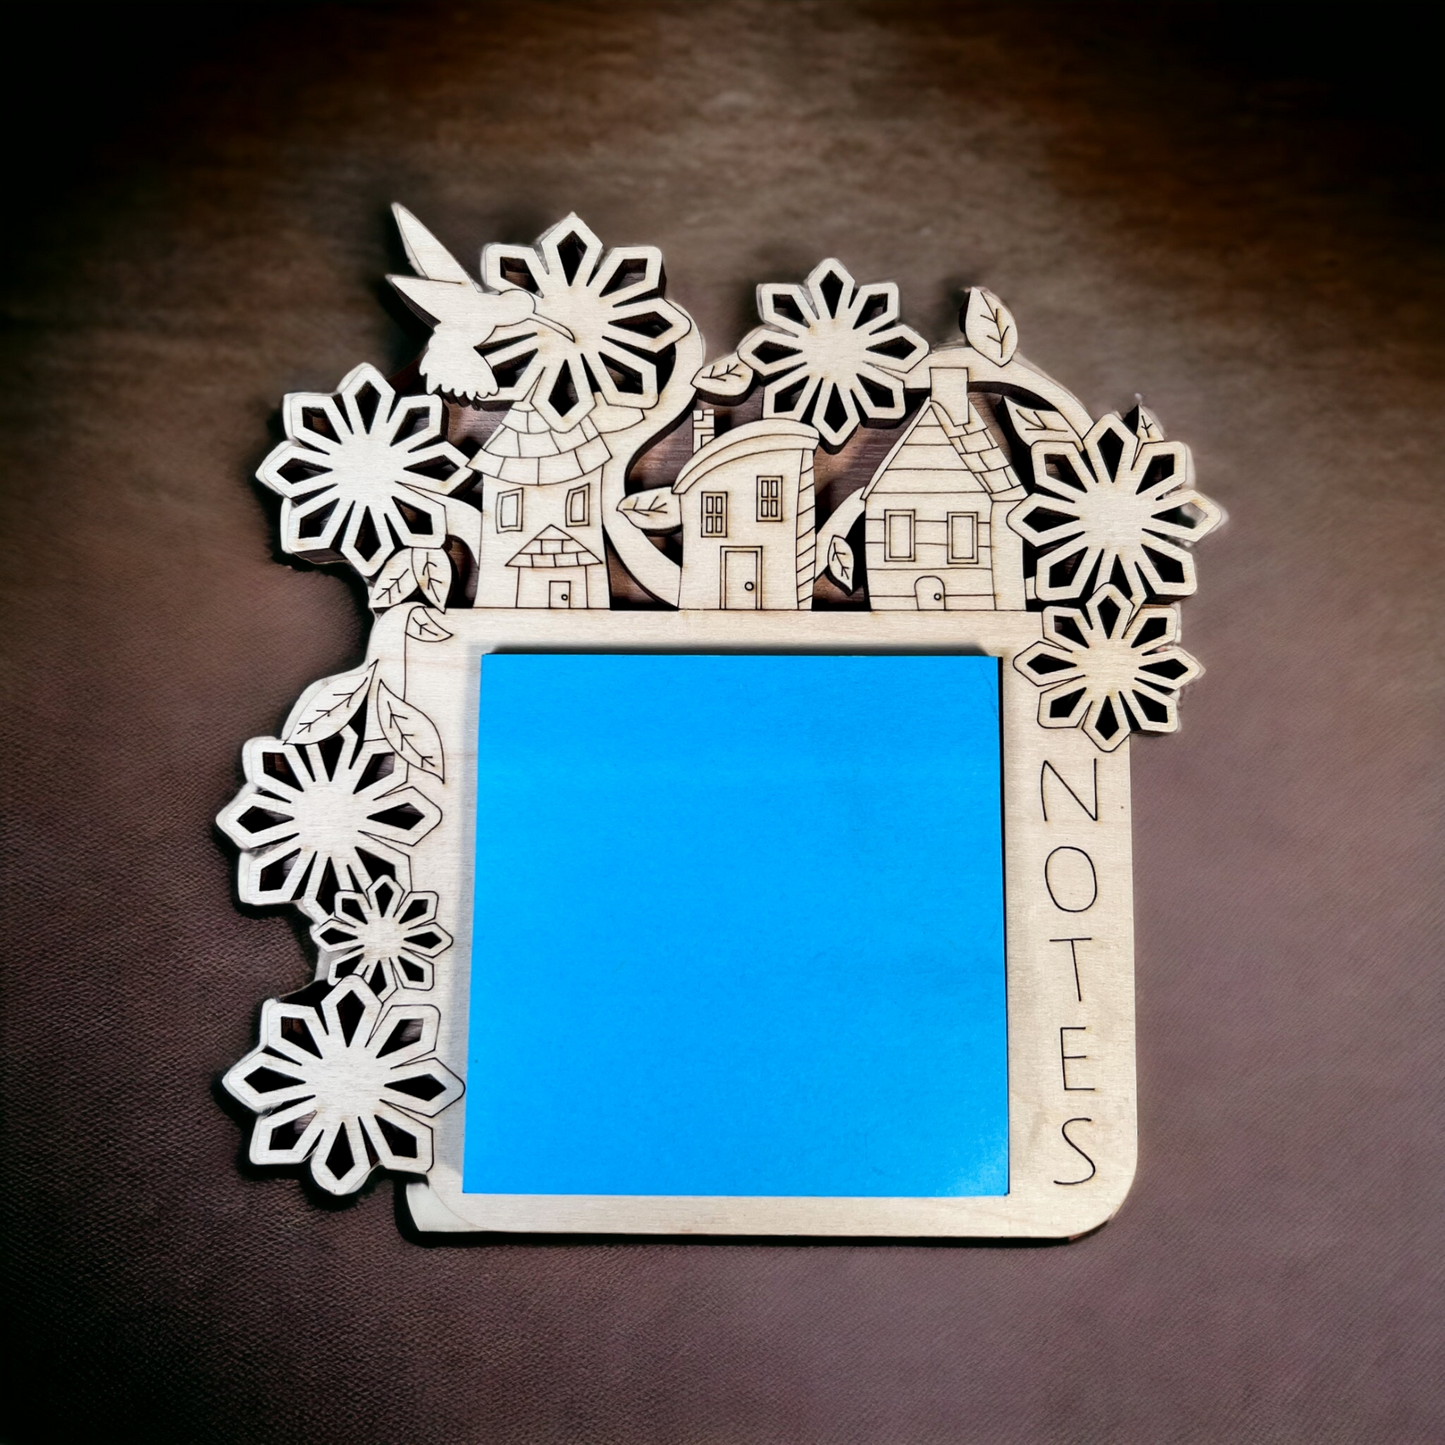 Floral house design Post-it note holders